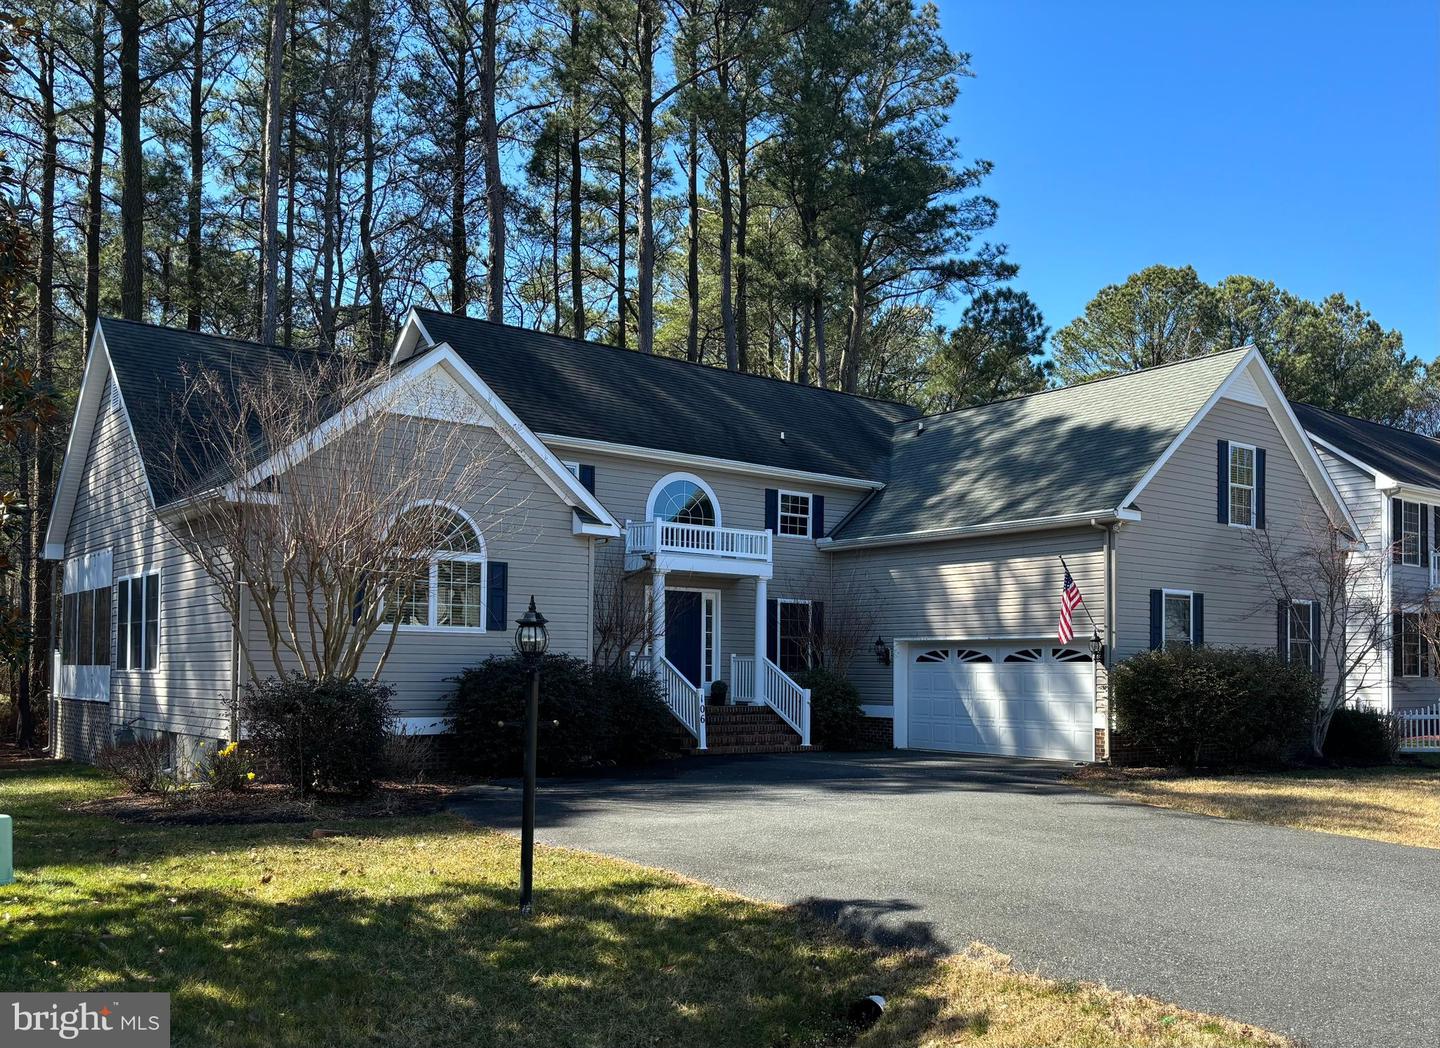 MDWO2019426-802903744502-2024-03-08-00-14-49 106 Pine Forest Dr | Berlin, MD Real Estate For Sale | MLS# Mdwo2019426  - 1st Choice Properties